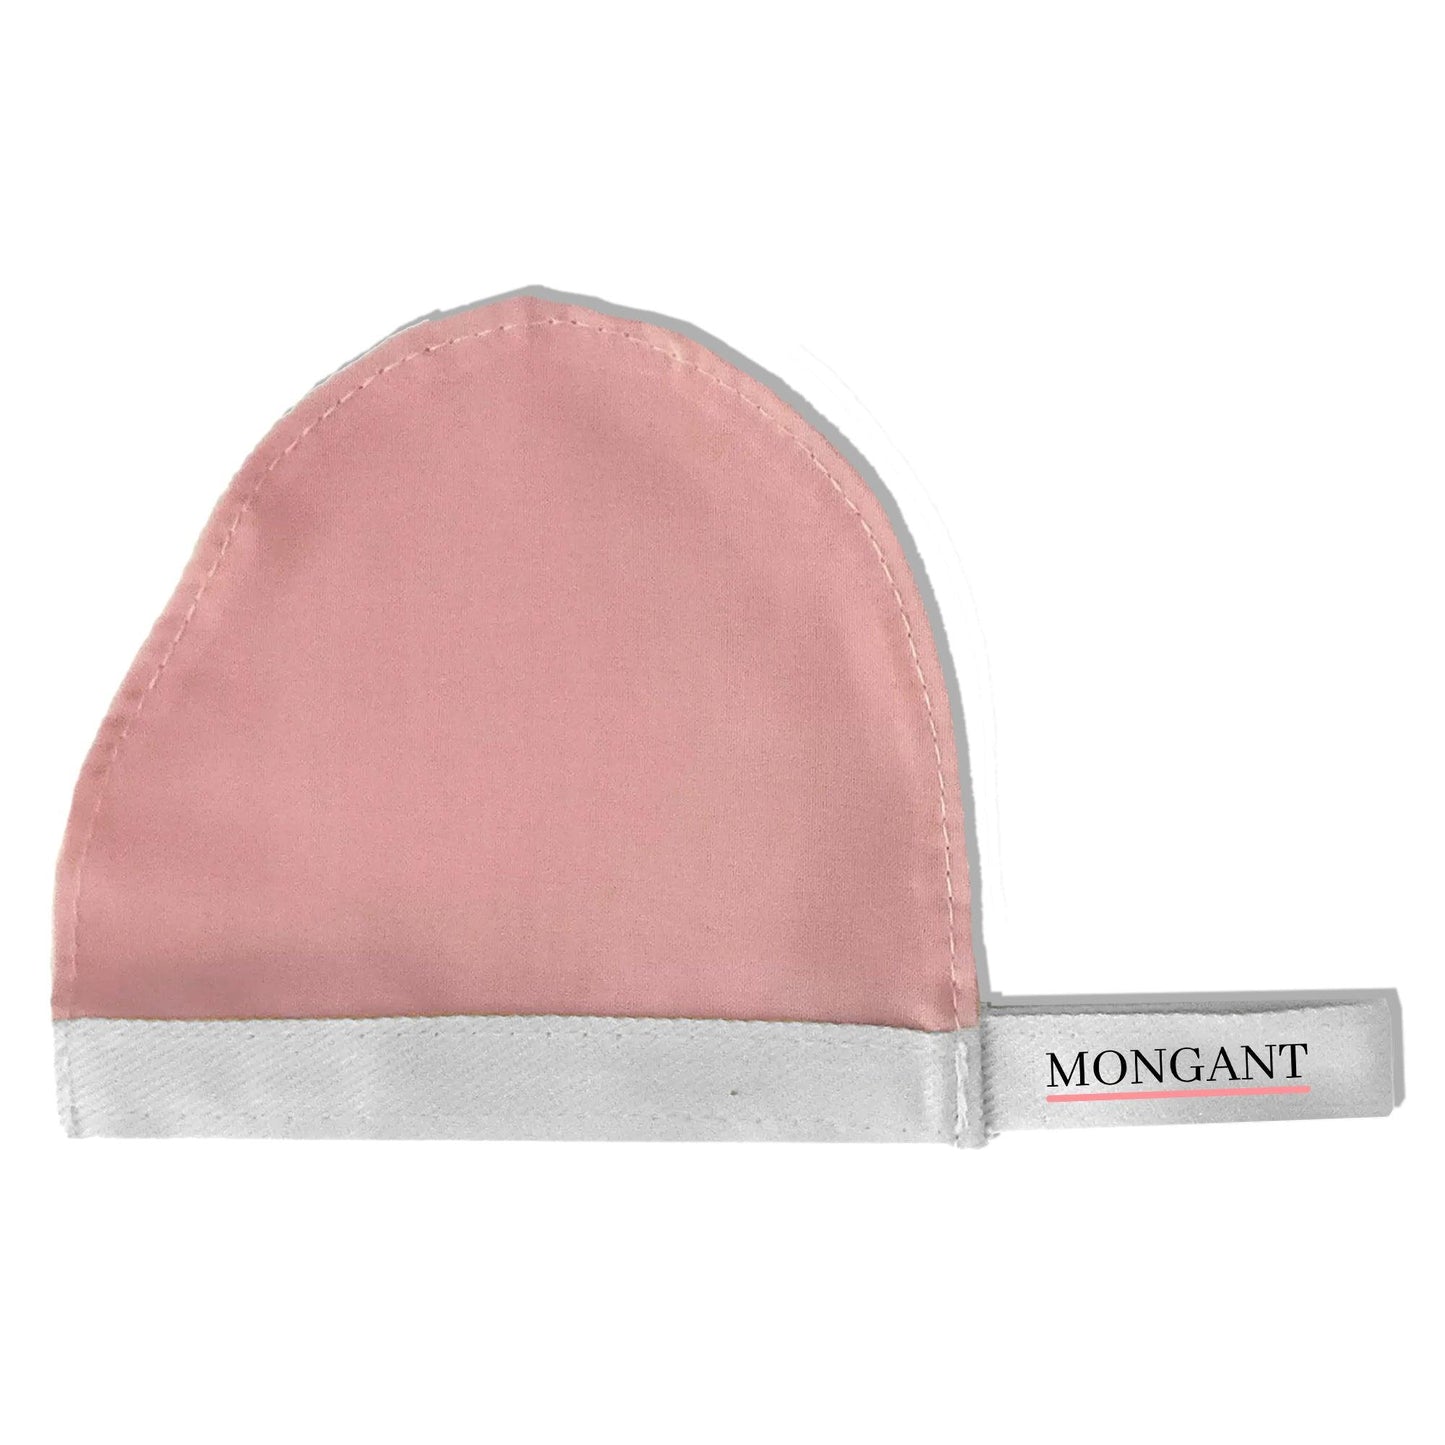 Free Face Scrubber - Mongant